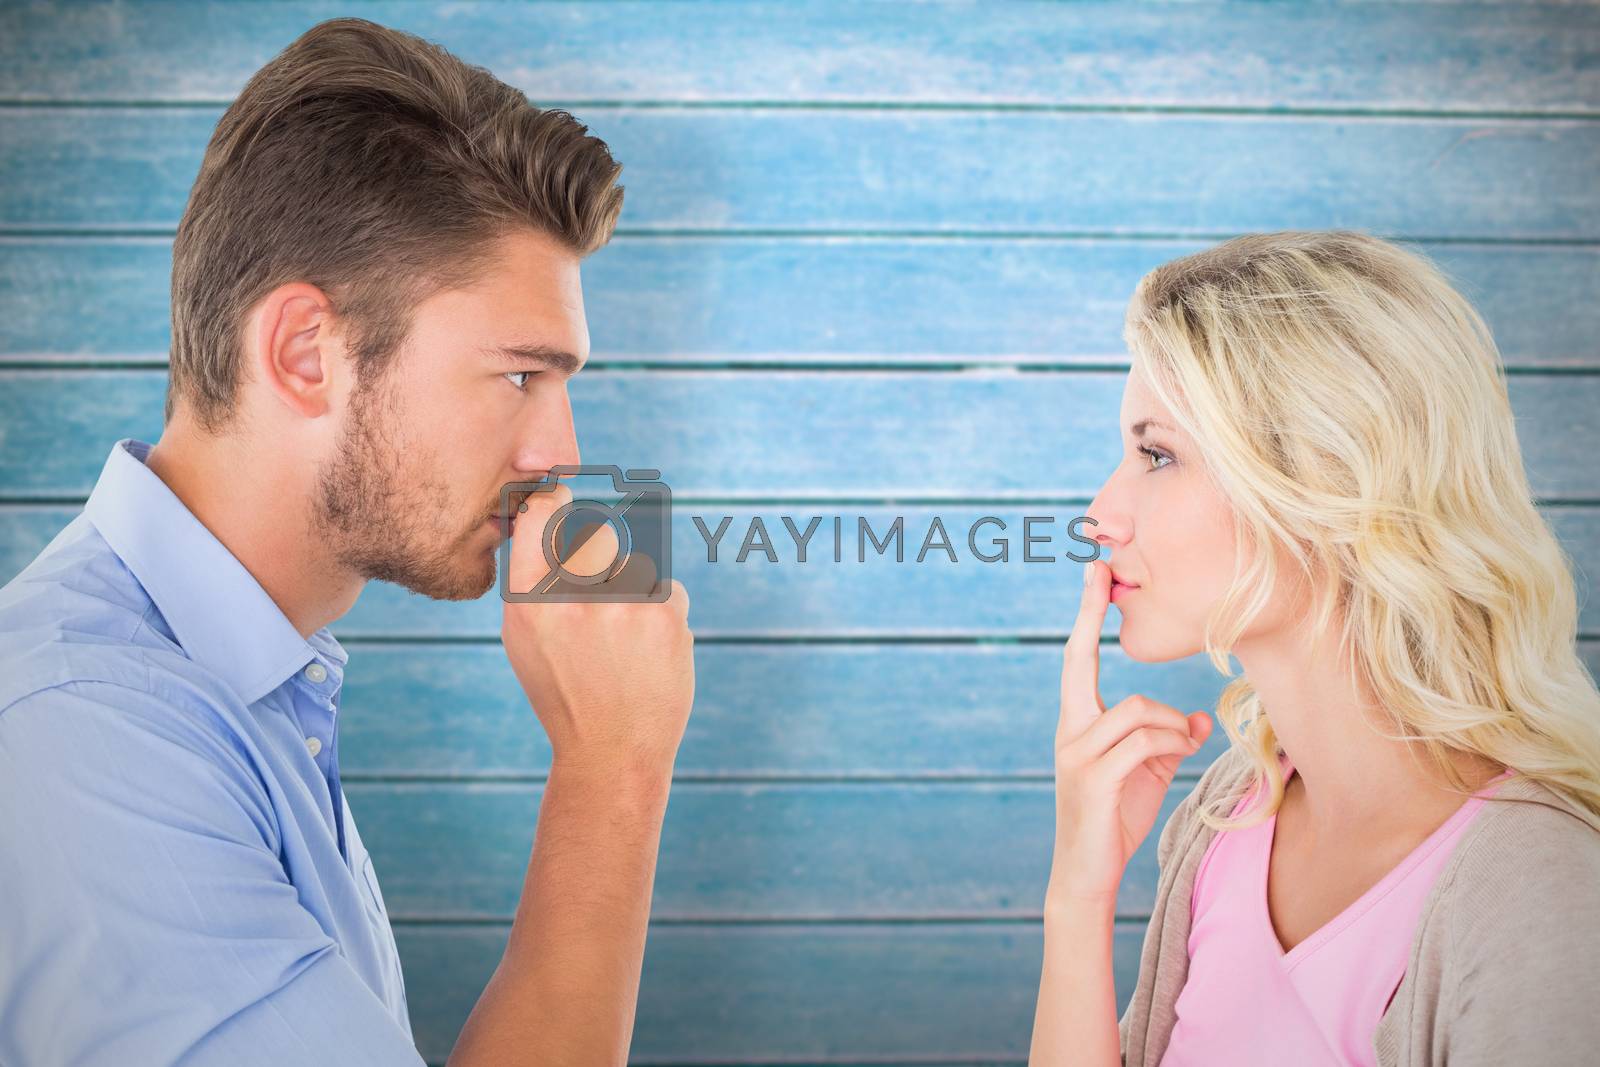 Royalty free image of Composite image of young couple staying silent with fingers on lips by Wavebreakmedia